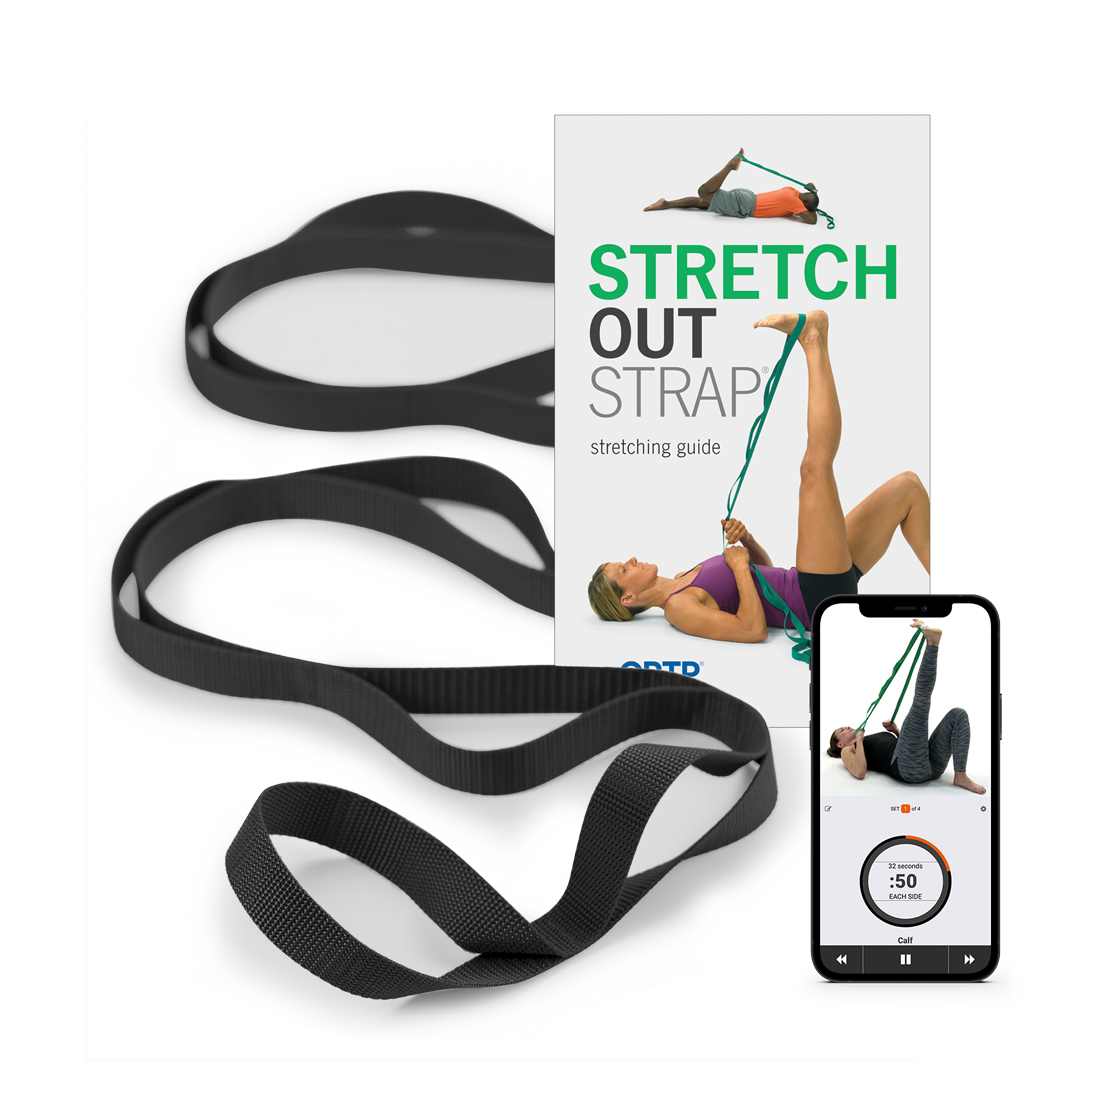 Stretch Out Strap W/ Booklet Stretching Products OPTP, 51% OFF